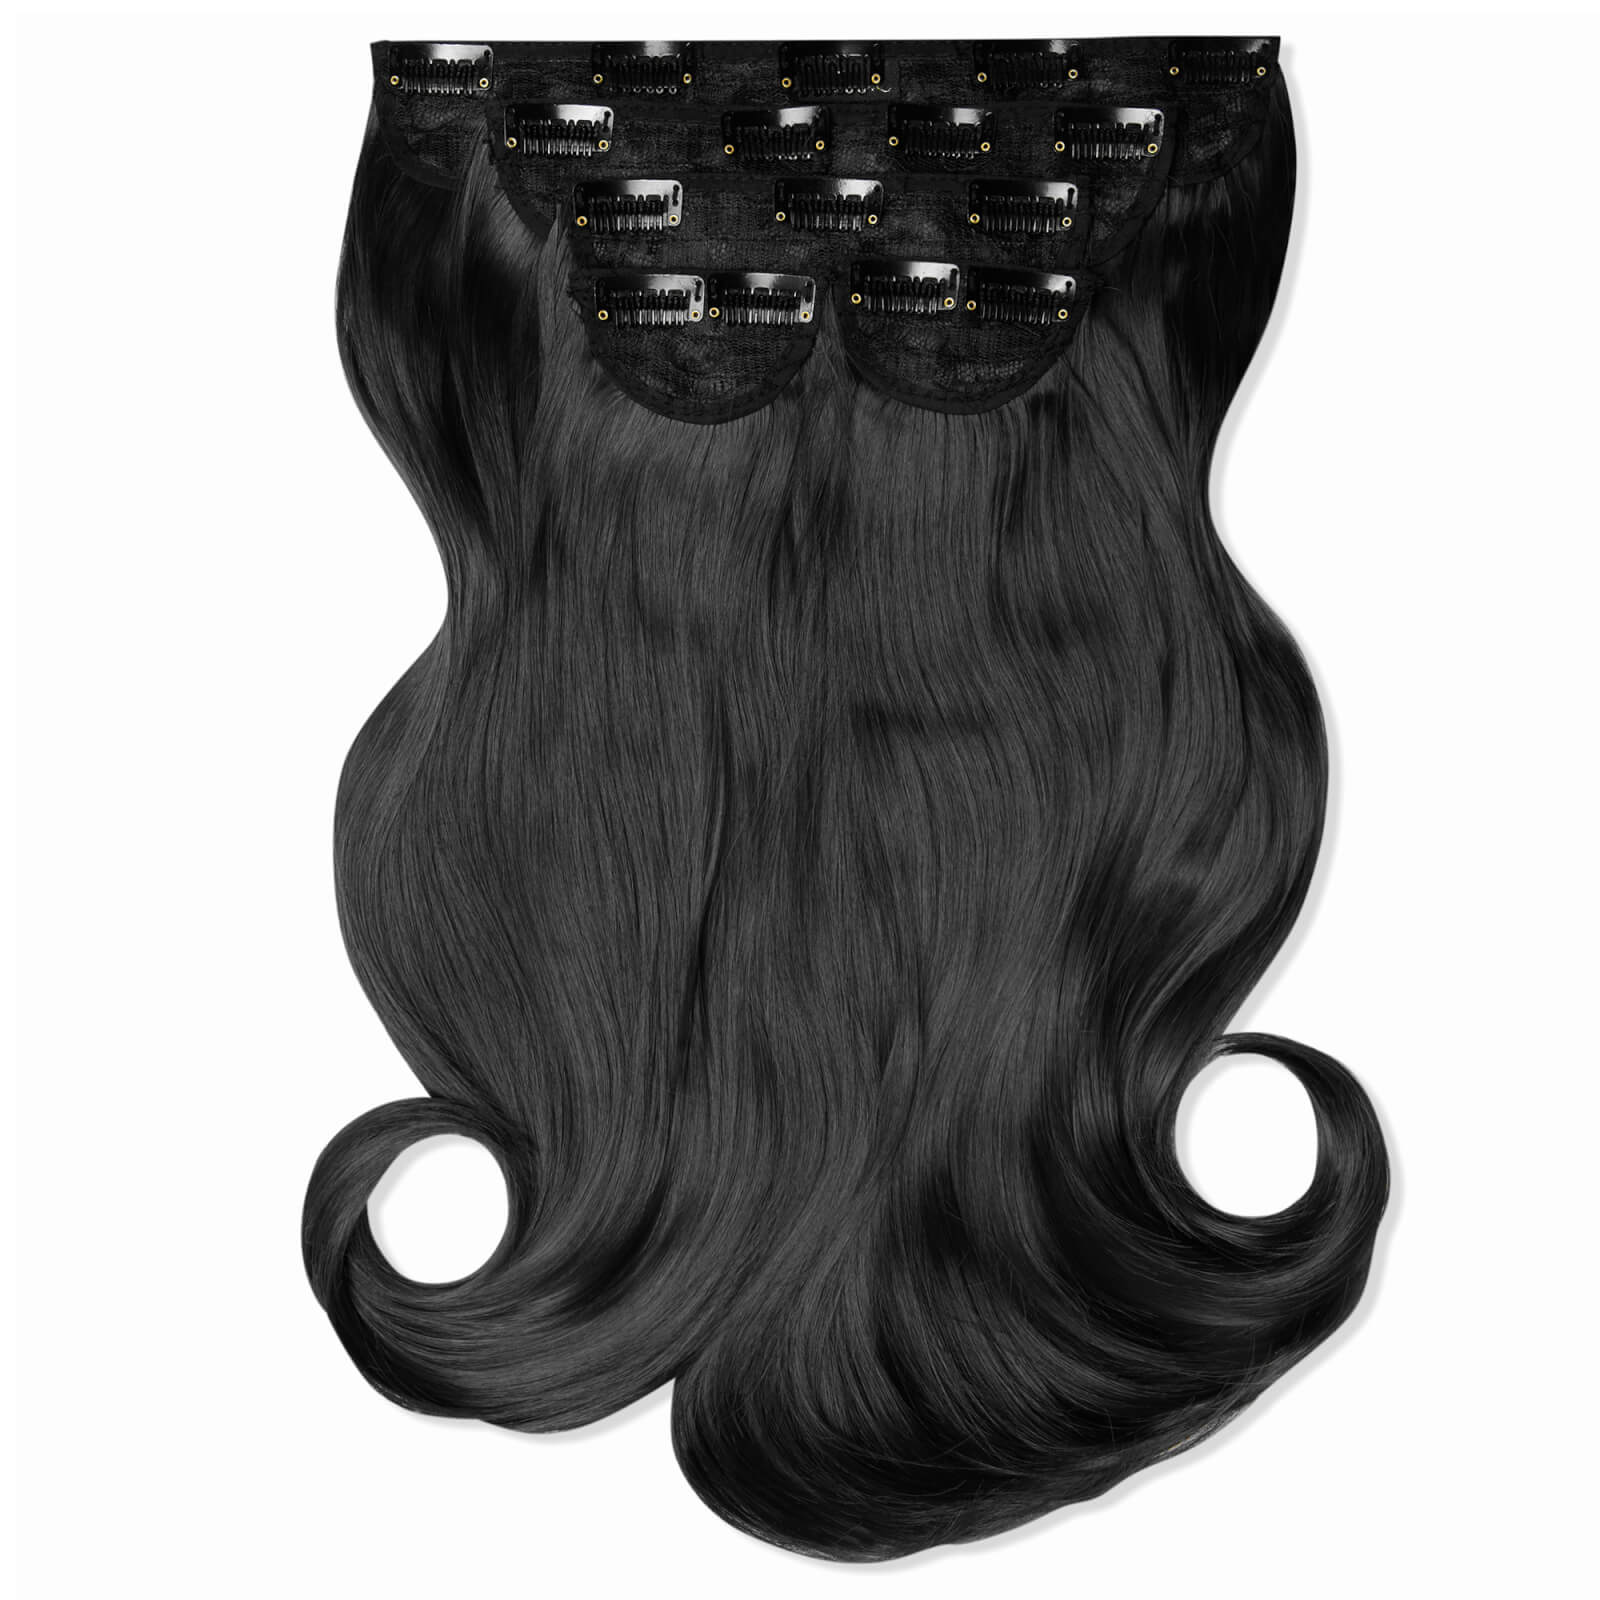 Lullabellz Super Thick 16  5 Piece Blow Dry Wavy Clip In Extensions (various Shades) - Natural Black